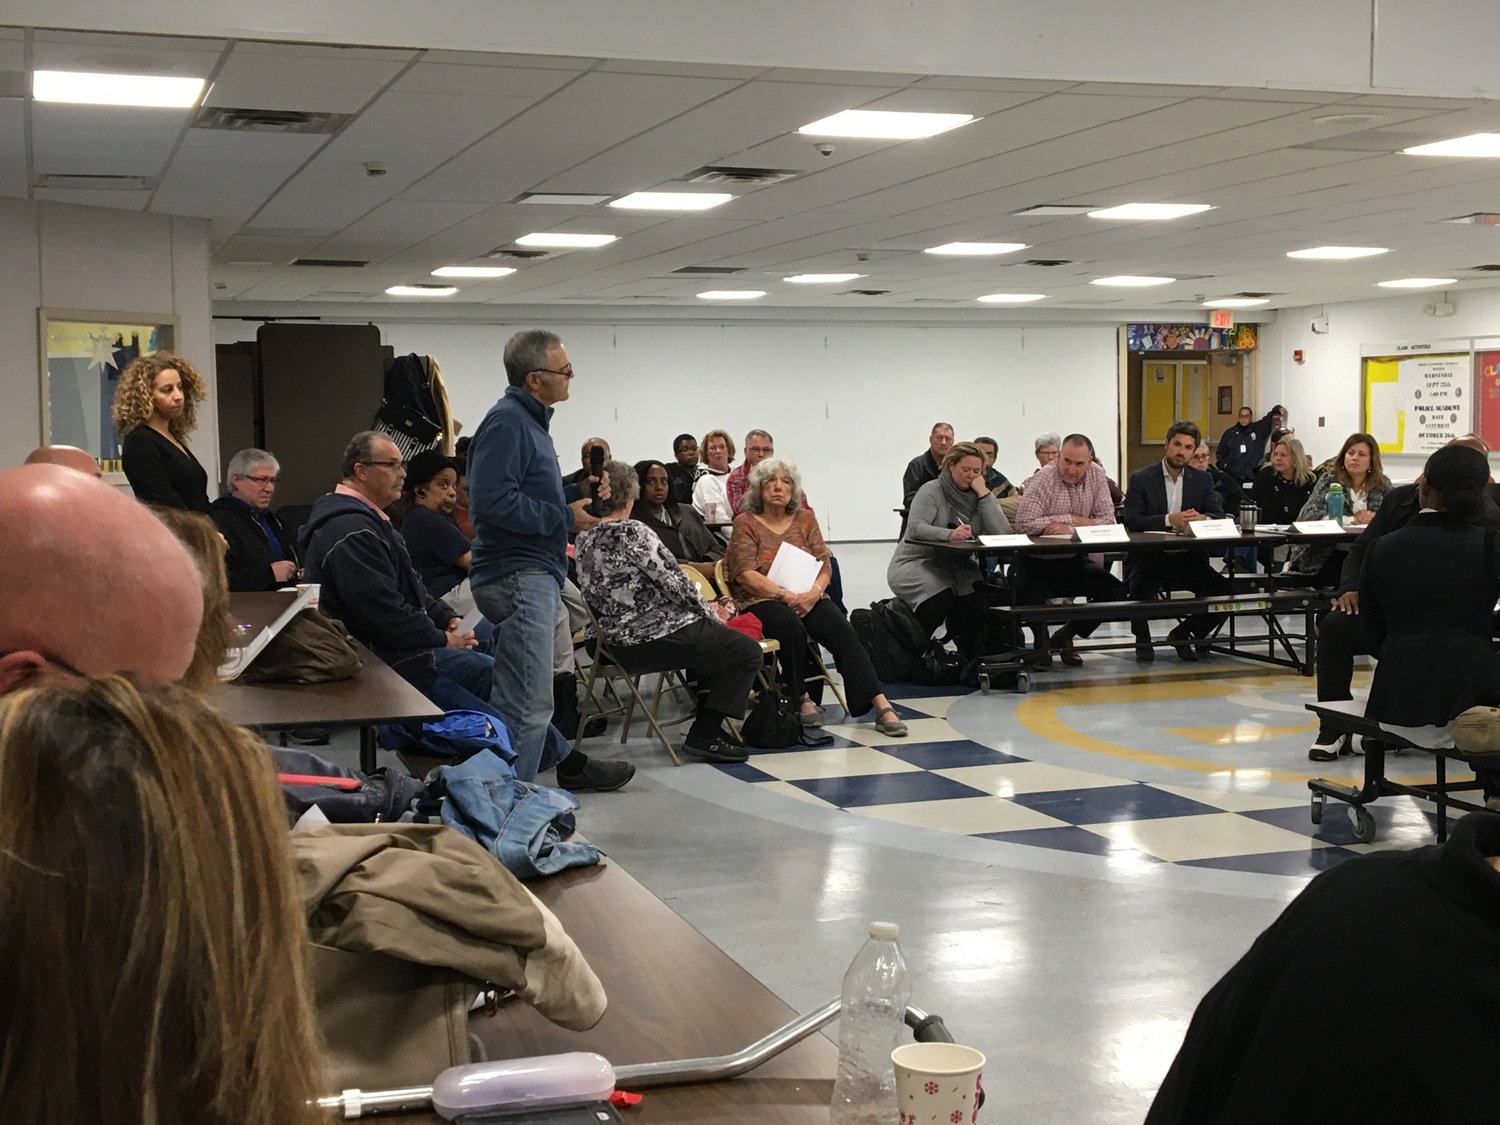 Baldwin Civic Association Vice President Steve Greenfield shared his concerns during the public comment period of the first Baldwin Downtown Revitalization Initiative Local Planning Committee meeting on Nov. 7.